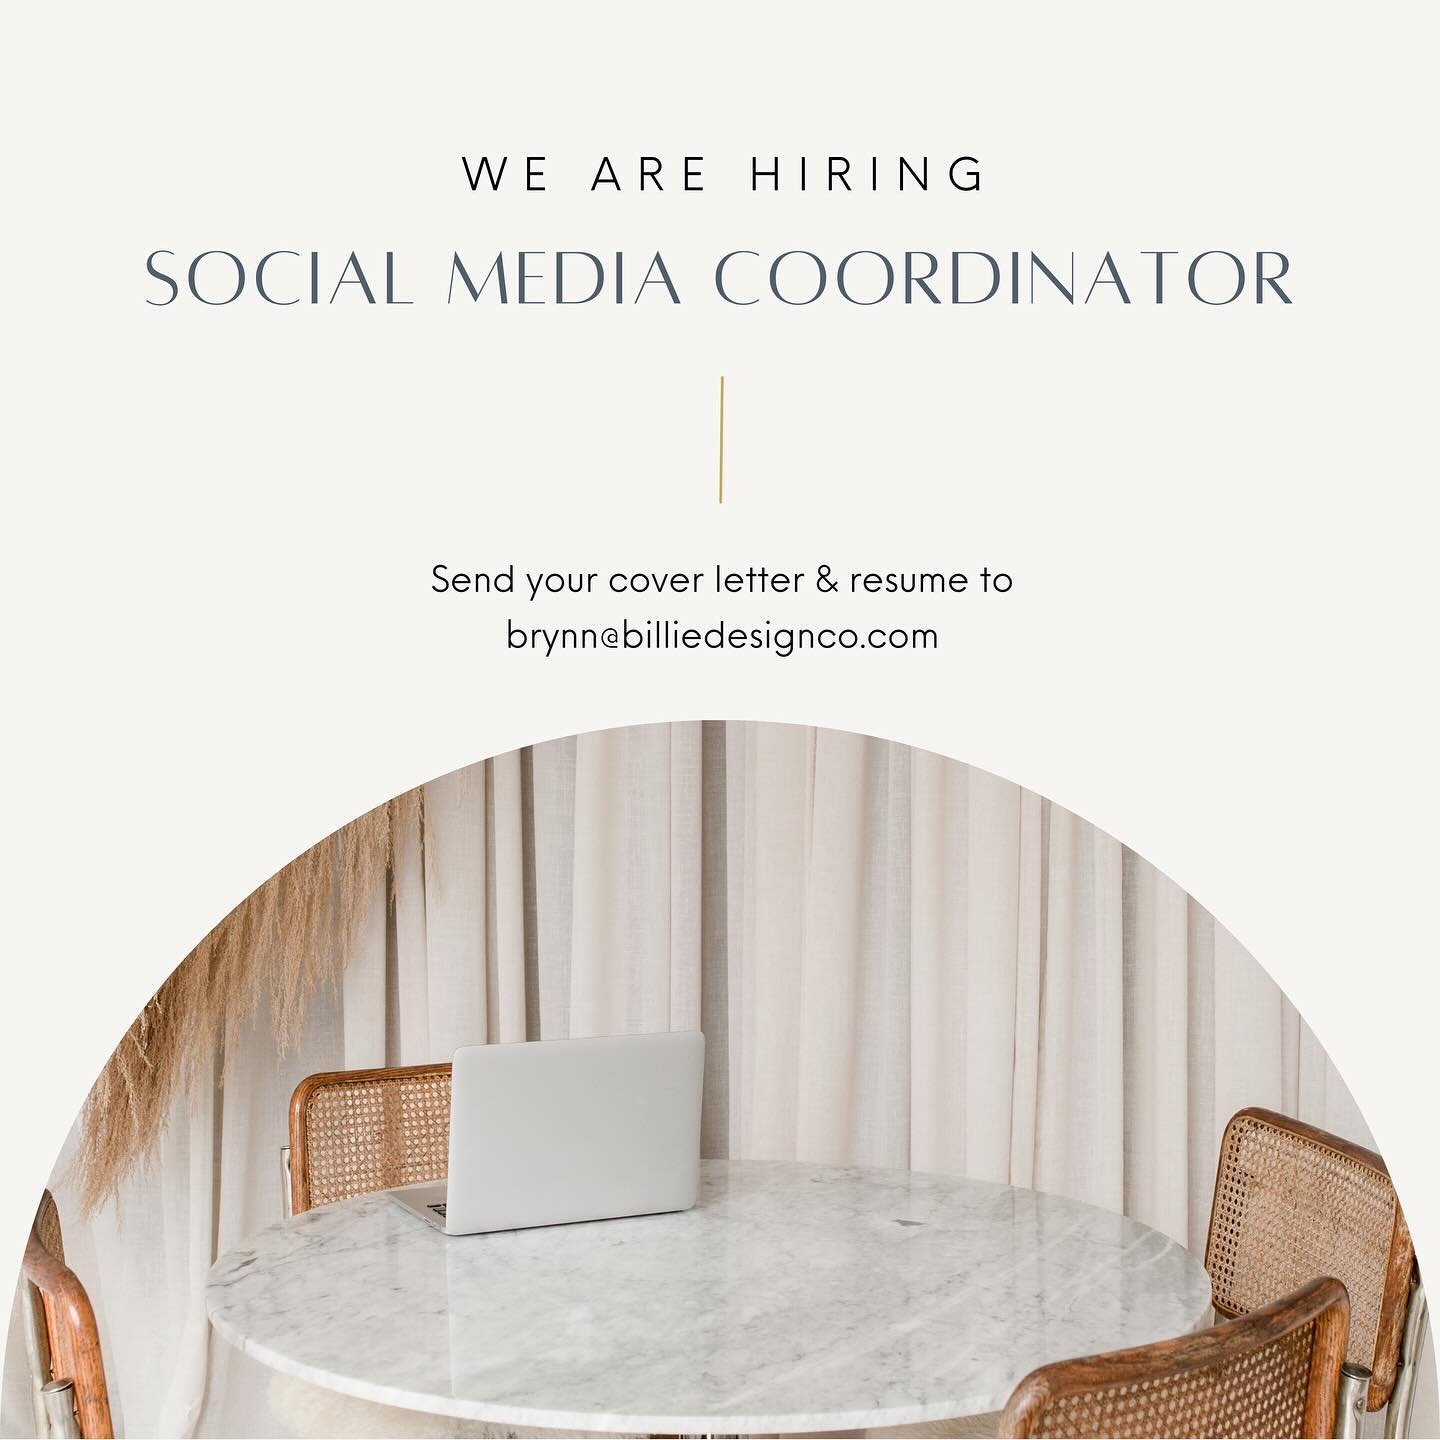 You heard it here first, we are hiring!

We are currently in search of a part time social media coordinator to join our growing team! 

To apply, please email us at brynn@billiedesignco.com